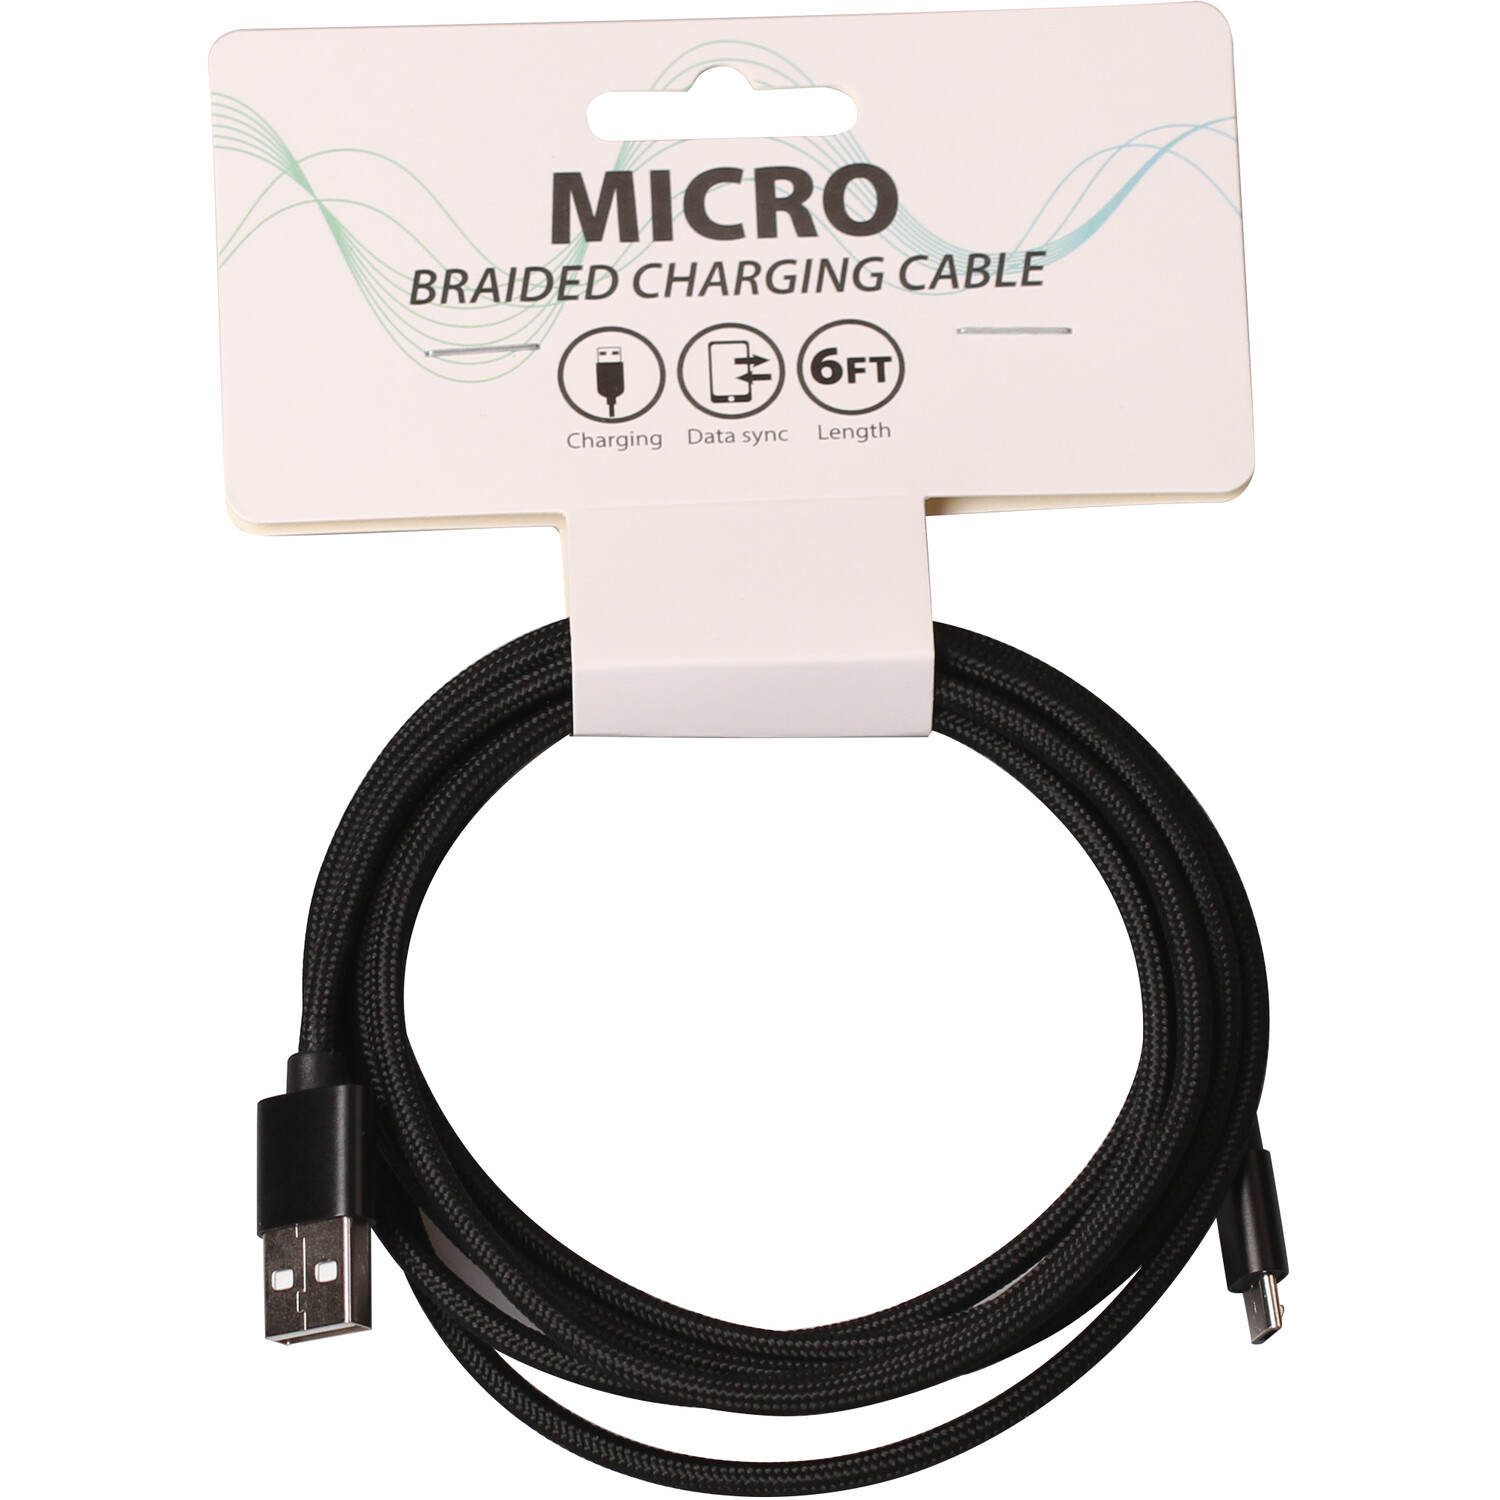 Micro Braided Charging Cable Image